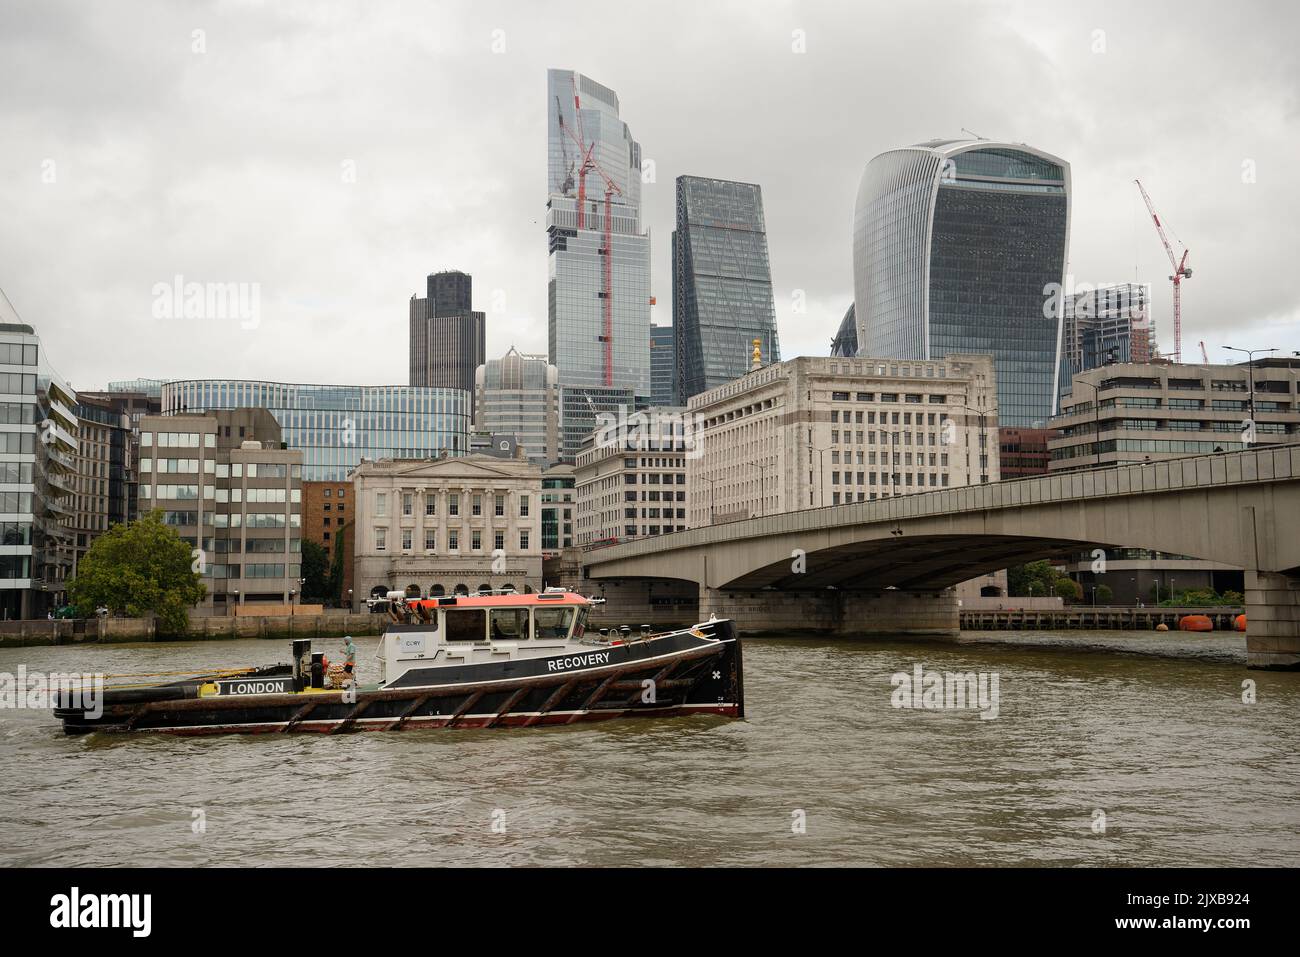 The City of London with a boat on the river Thames called 'Recovery' which has to be good news! Stock Photo